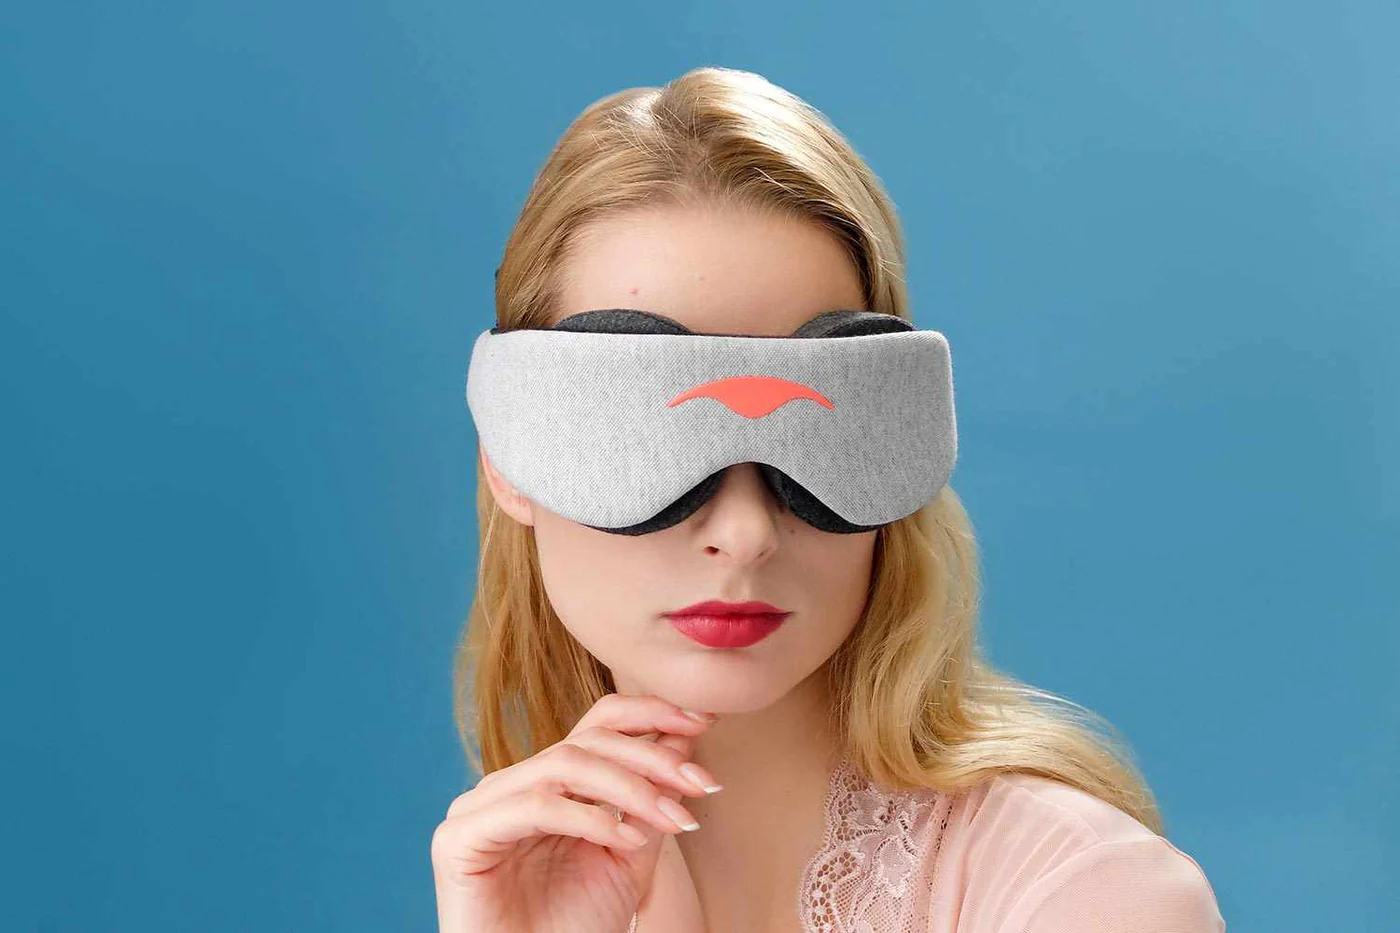 A blonde girl holding the tip of her chin while wearing a gray sleep mask for napping.